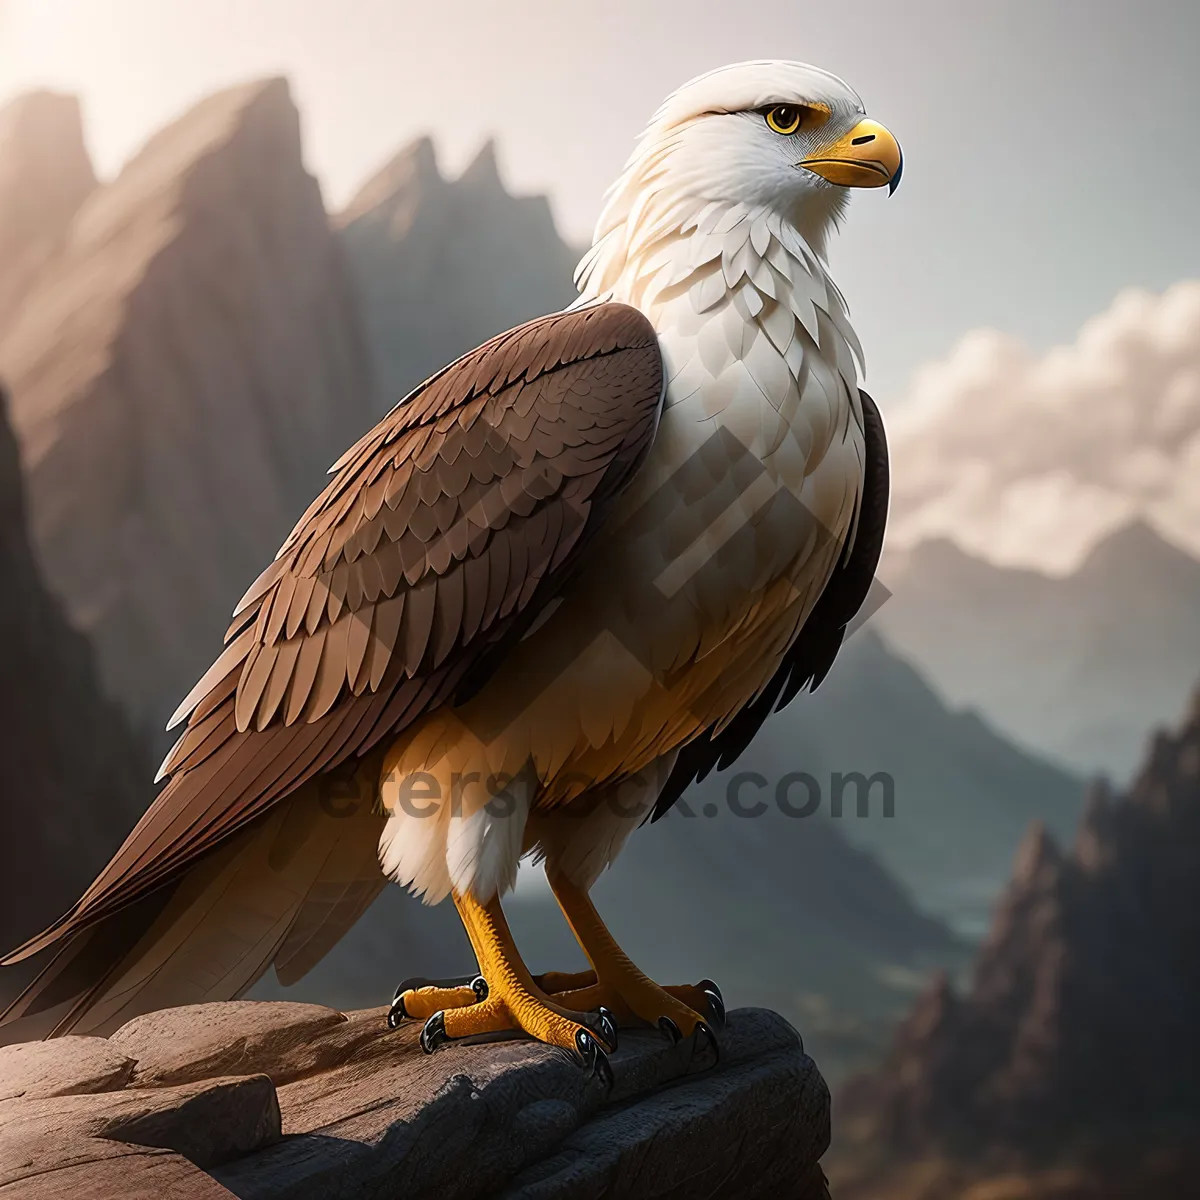 Picture of Majestic Falcon Spreading Its Powerful Wings